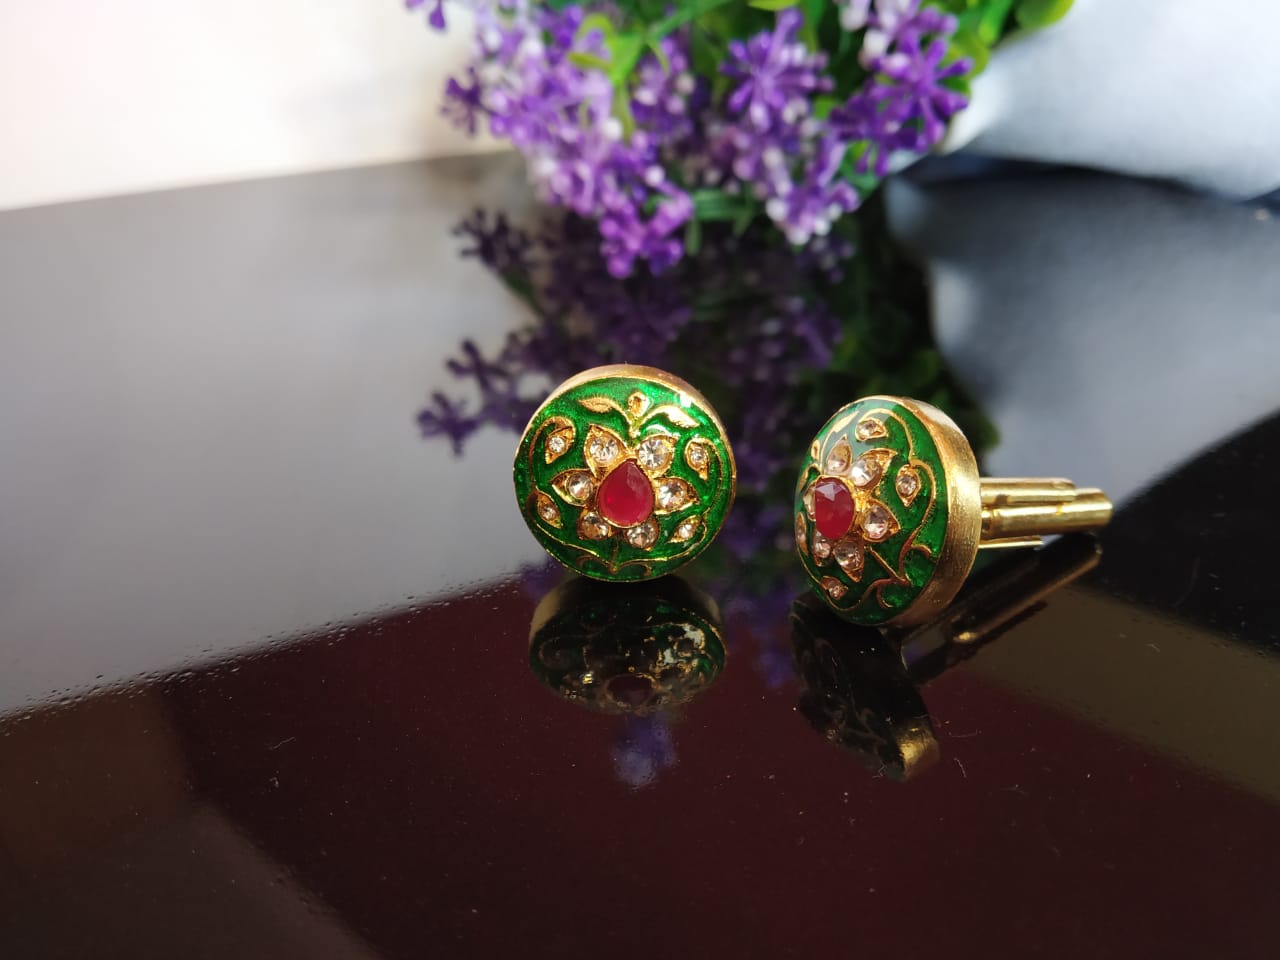 Cuff links with traditional Indian art of Meenakari